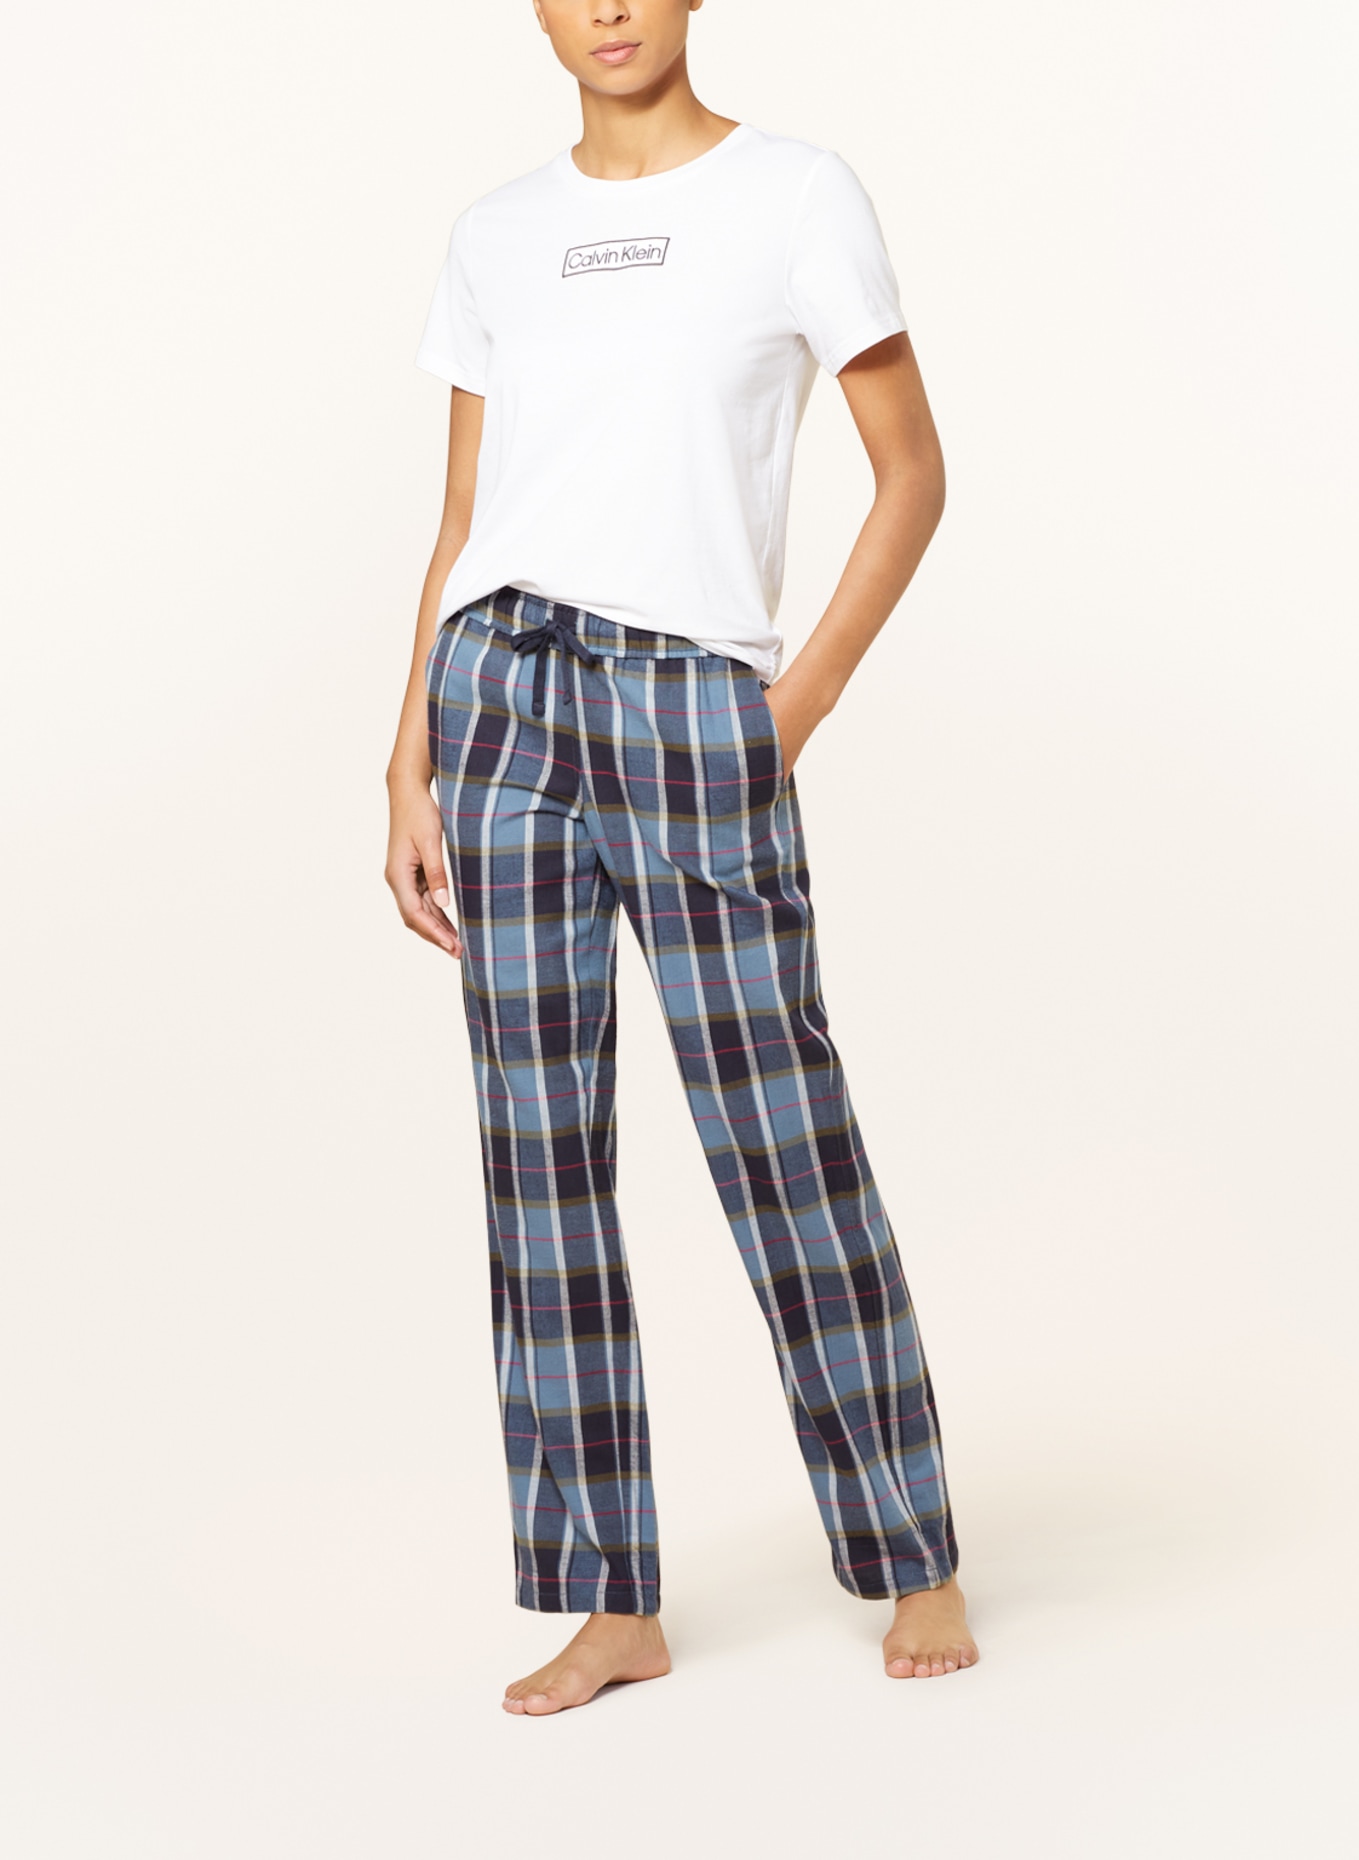 SCHIESSER Pajama pants MIX+RELAX in flannel, Color: DARK BLUE/ LIGHT BLUE/ WHITE (Image 2)